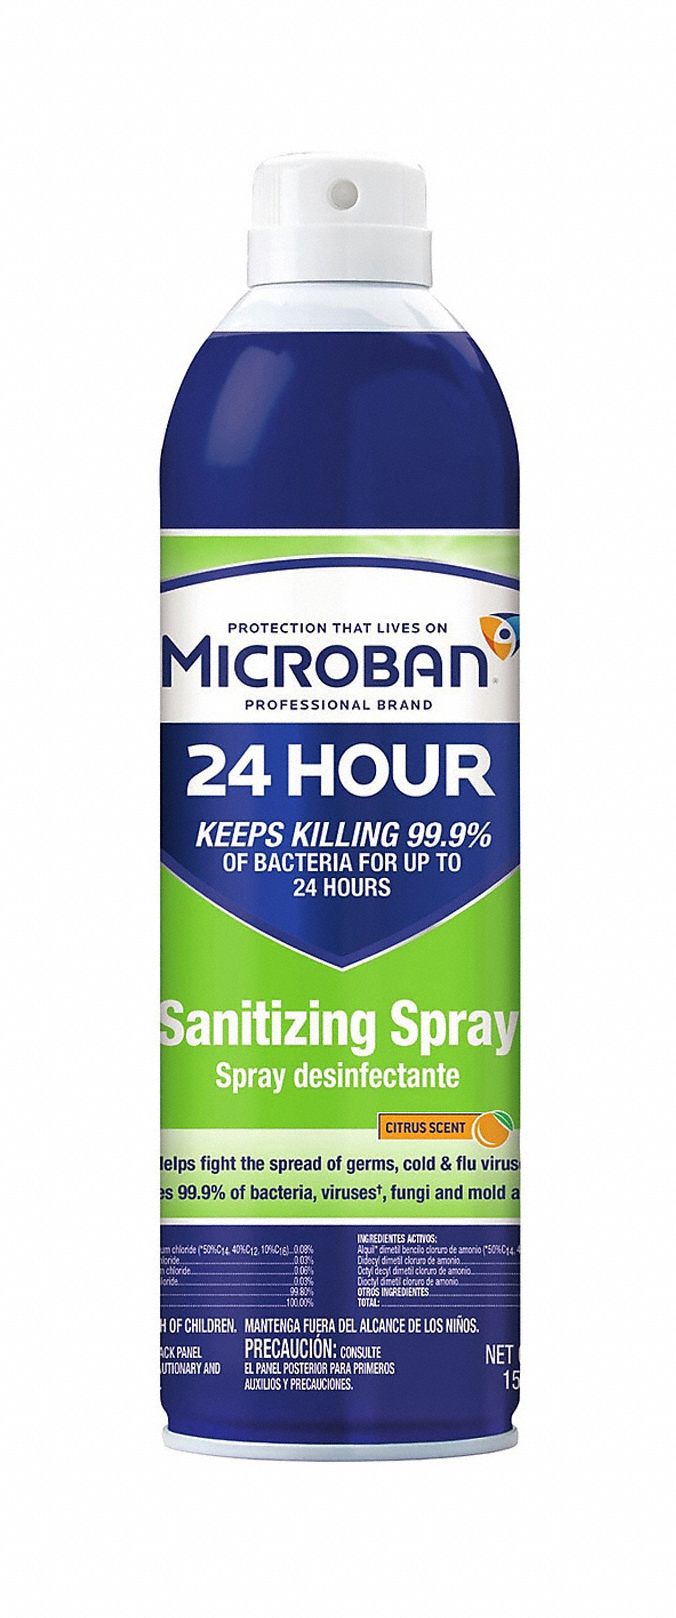 Disinfectant and Sanitizing Spray: Aerosol Spray Can, 15 oz Container Size, Liquid, 6 PK